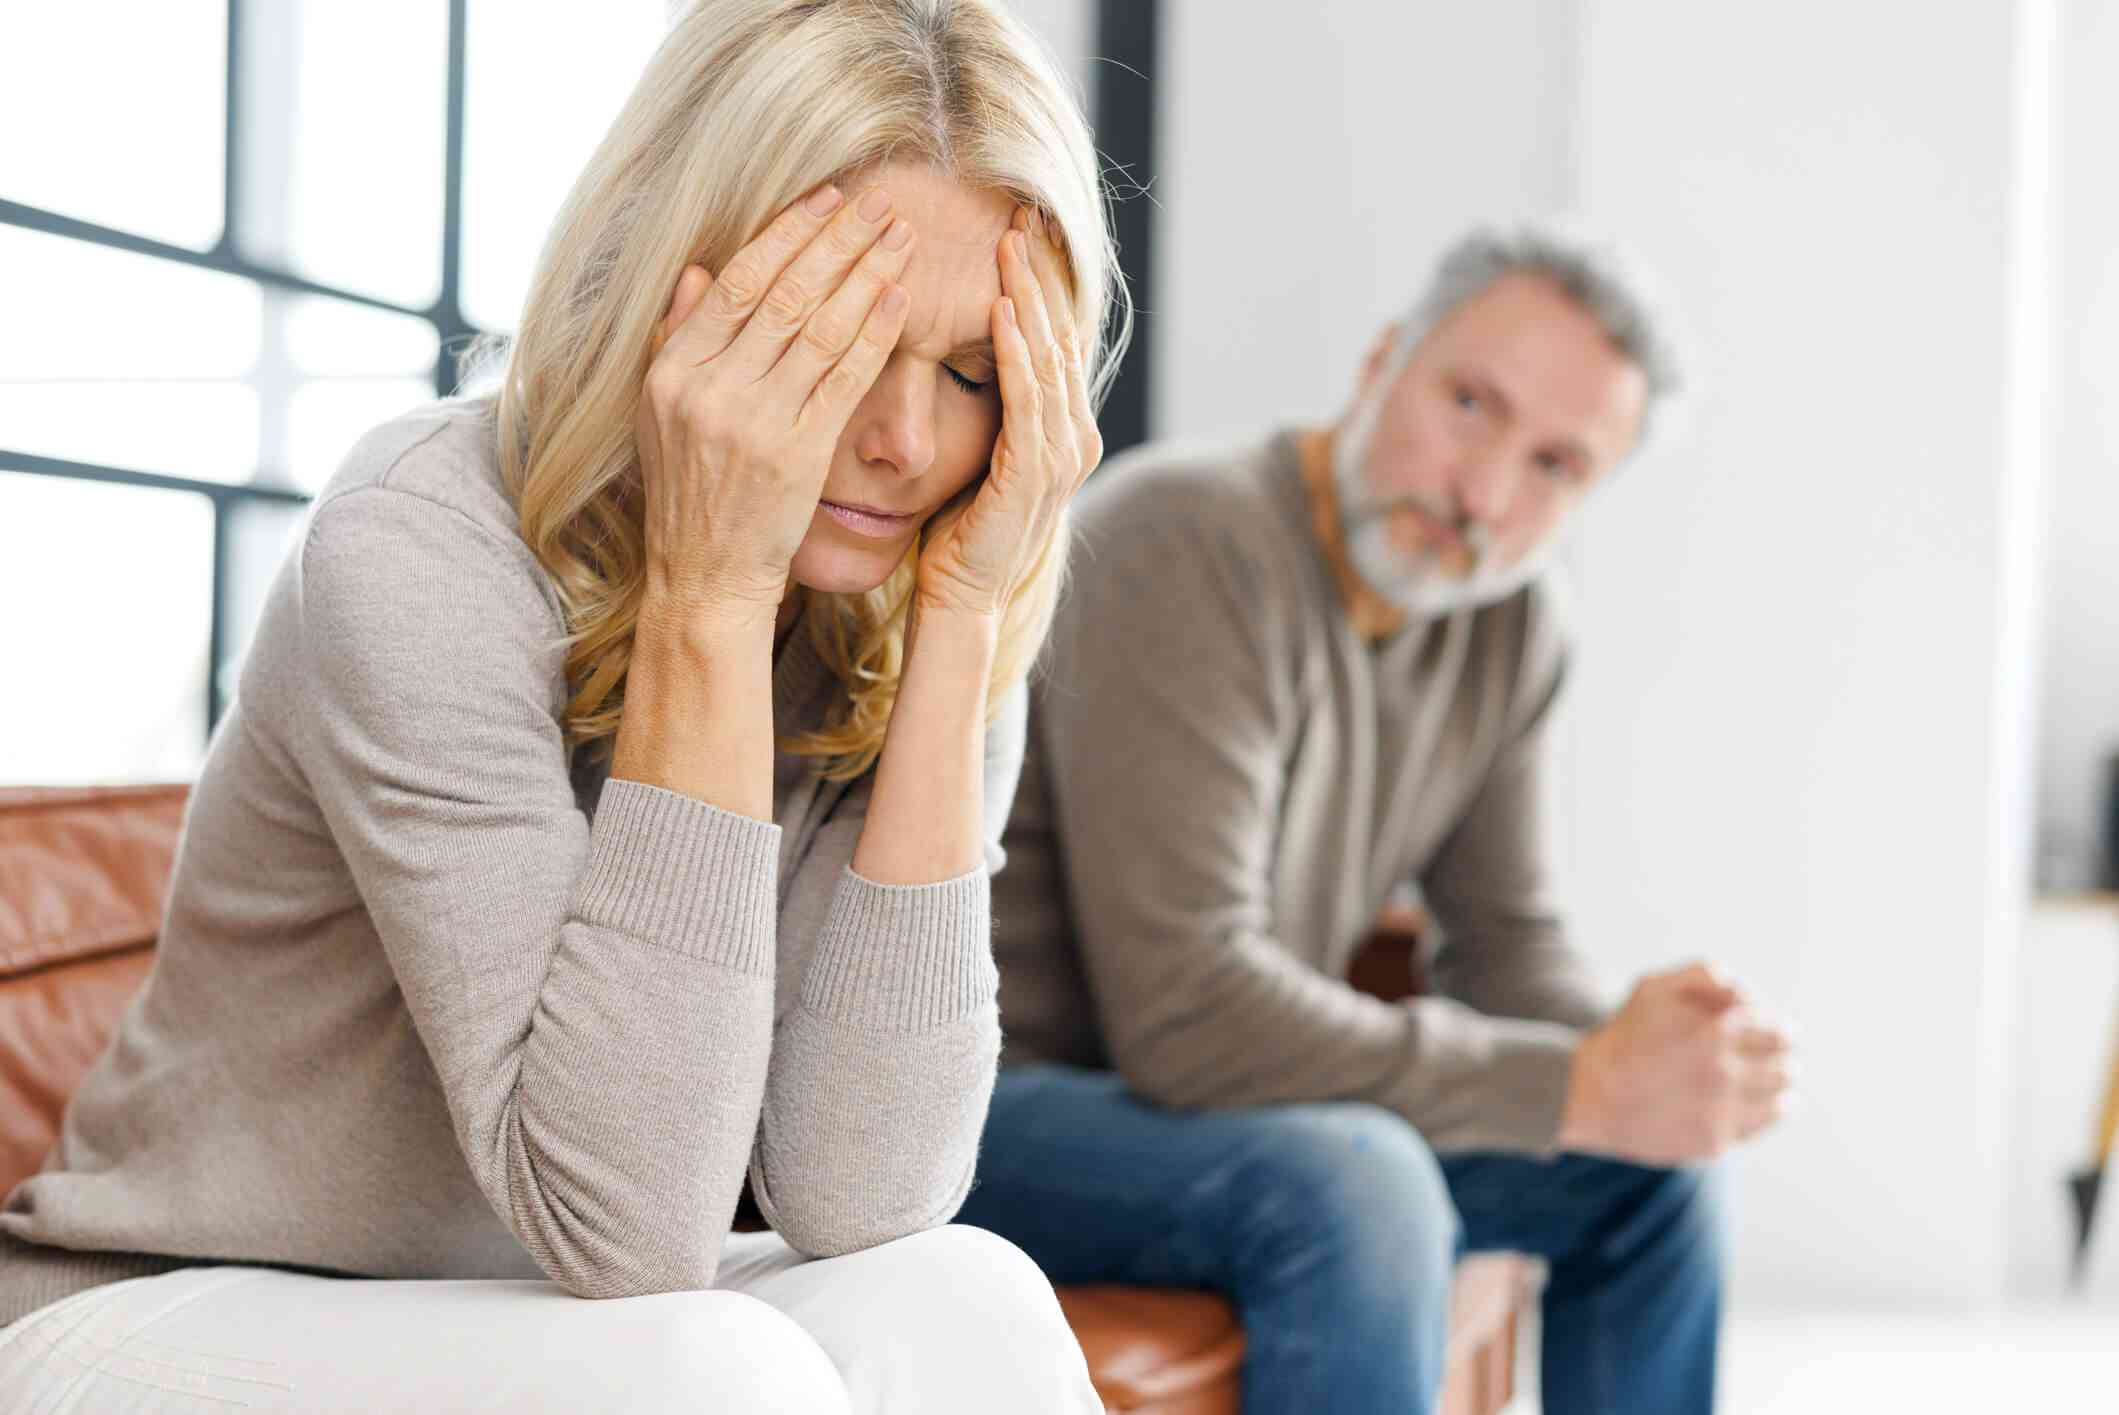 Husband With Anger Issues? Learn How Being Angry Can Ruin Your Marriage BetterHelp picture